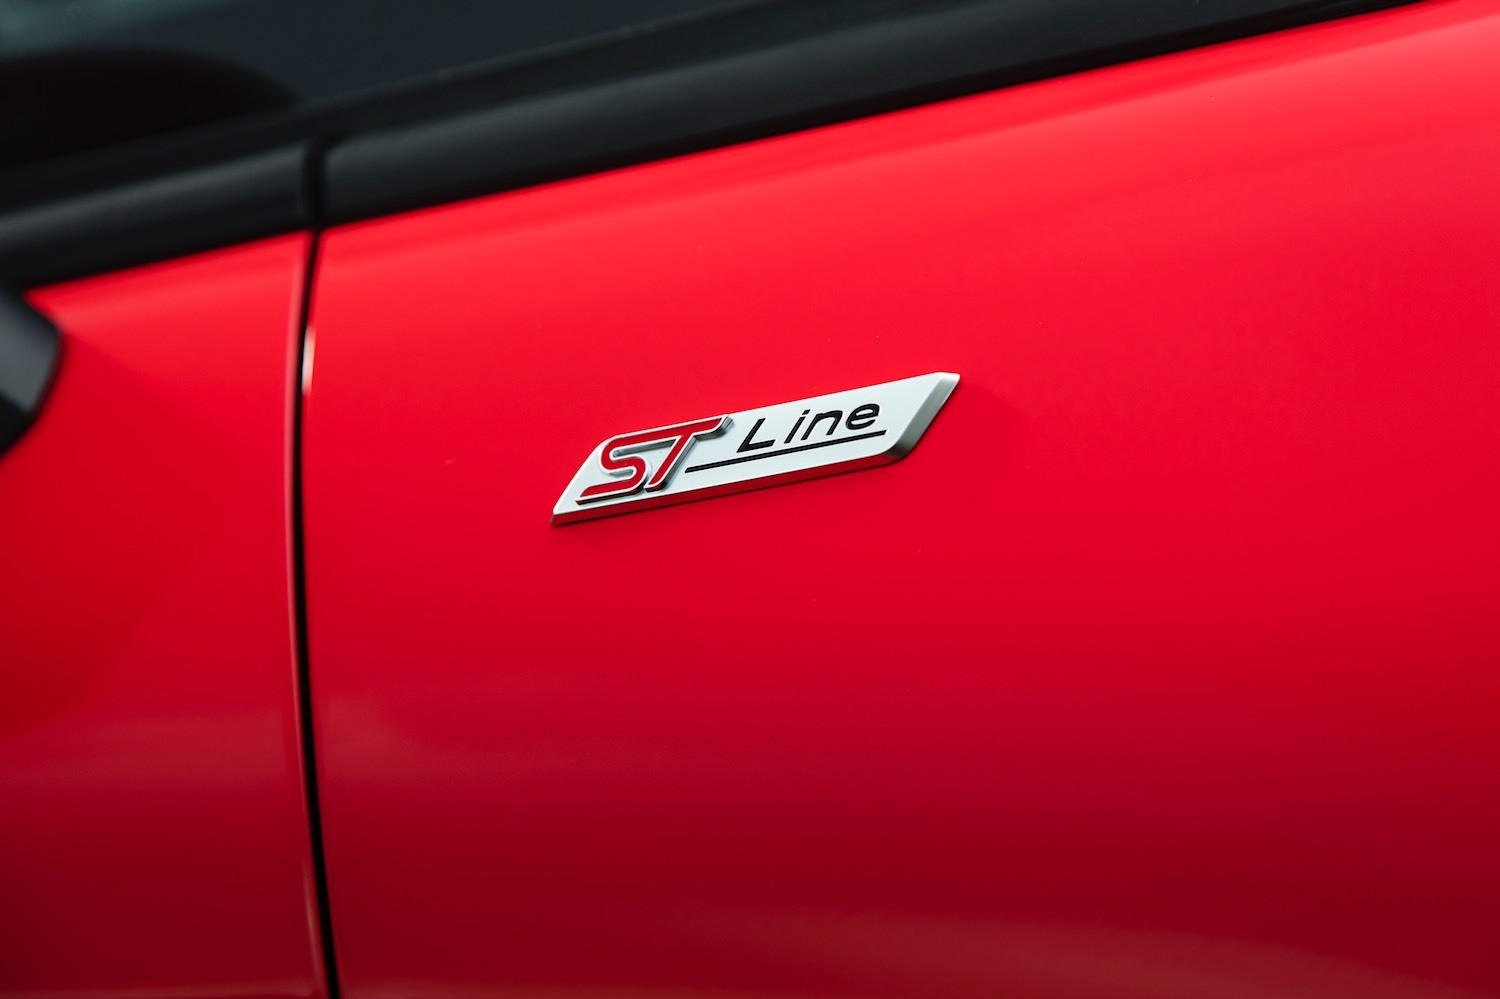 Neil Lyndon drives the All-New Ford Fiesta ST-Line 24